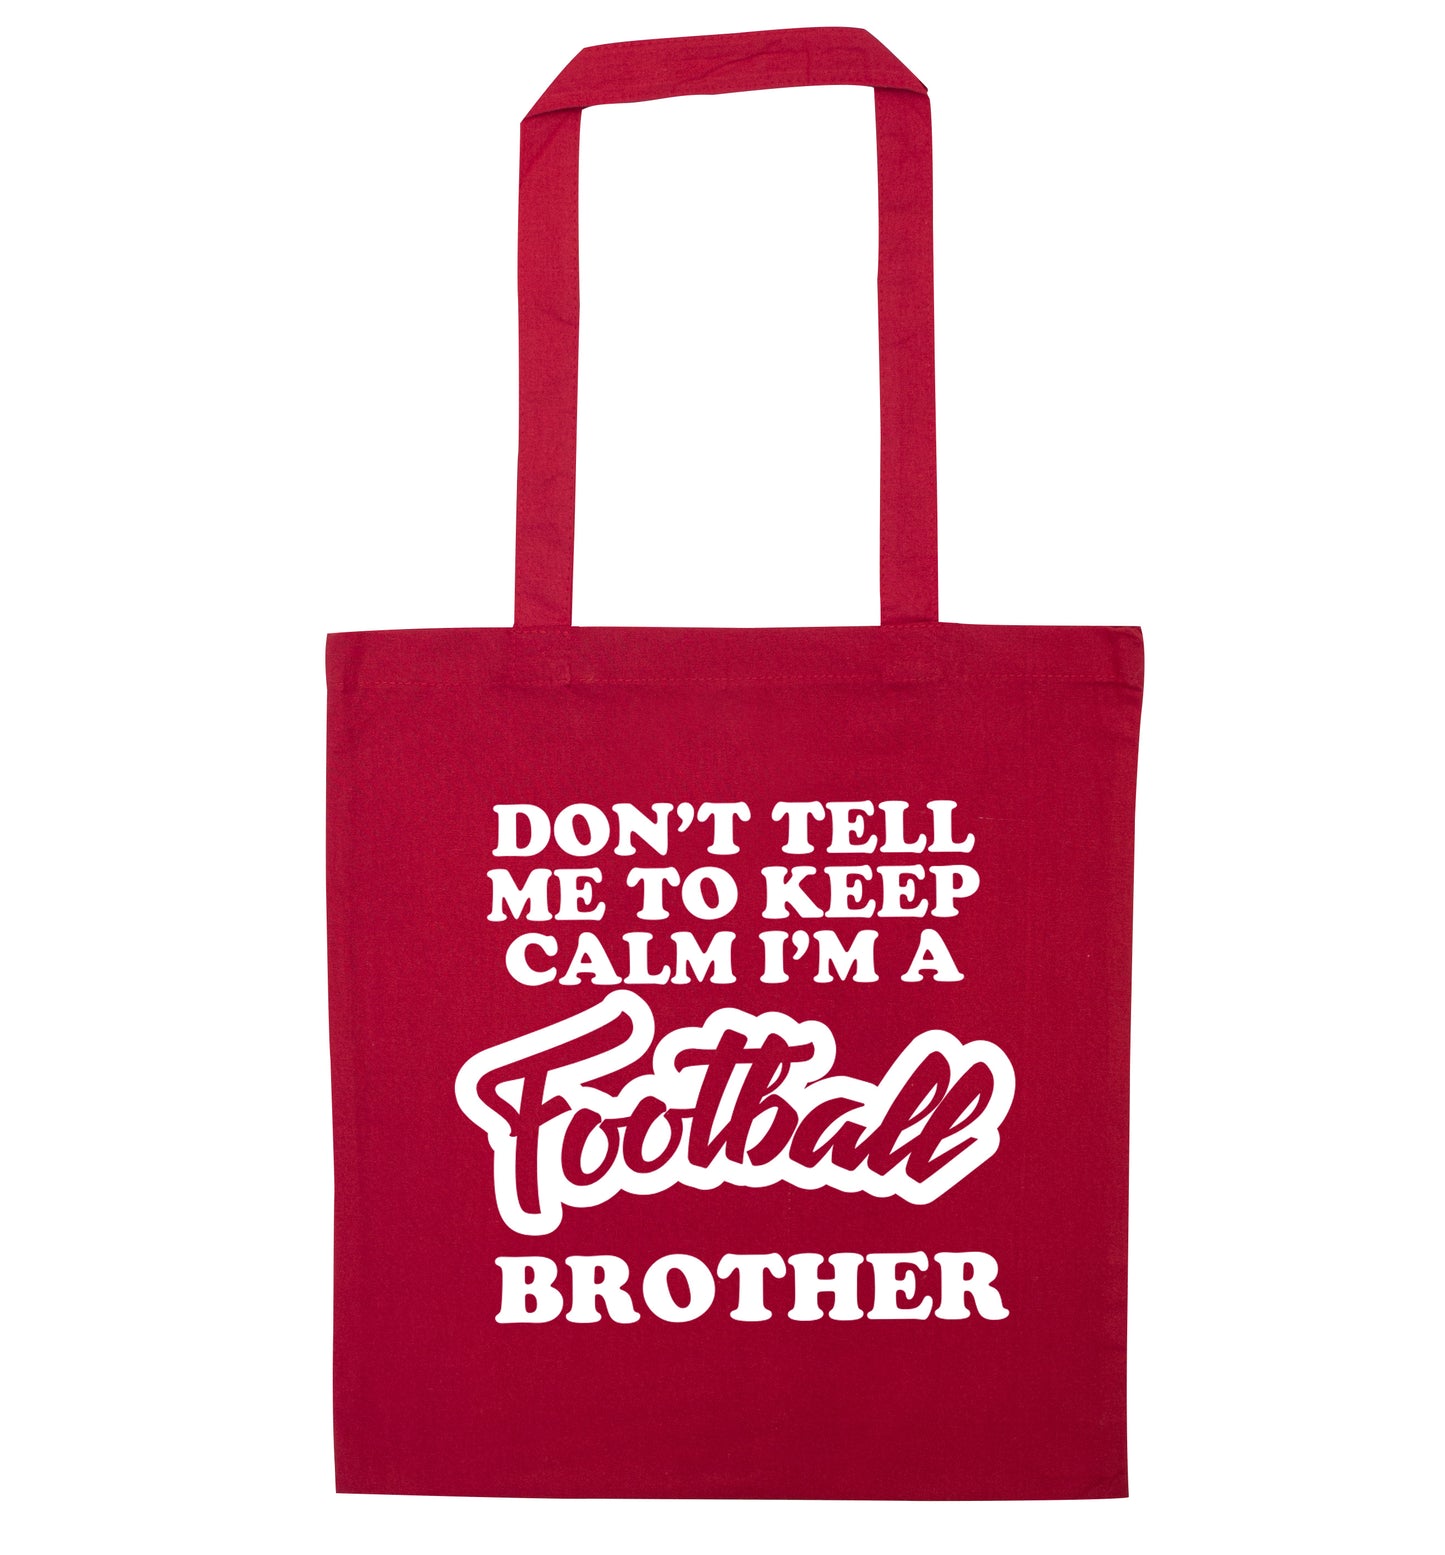 Don't tell me to keep calm I'm a football brother red tote bag